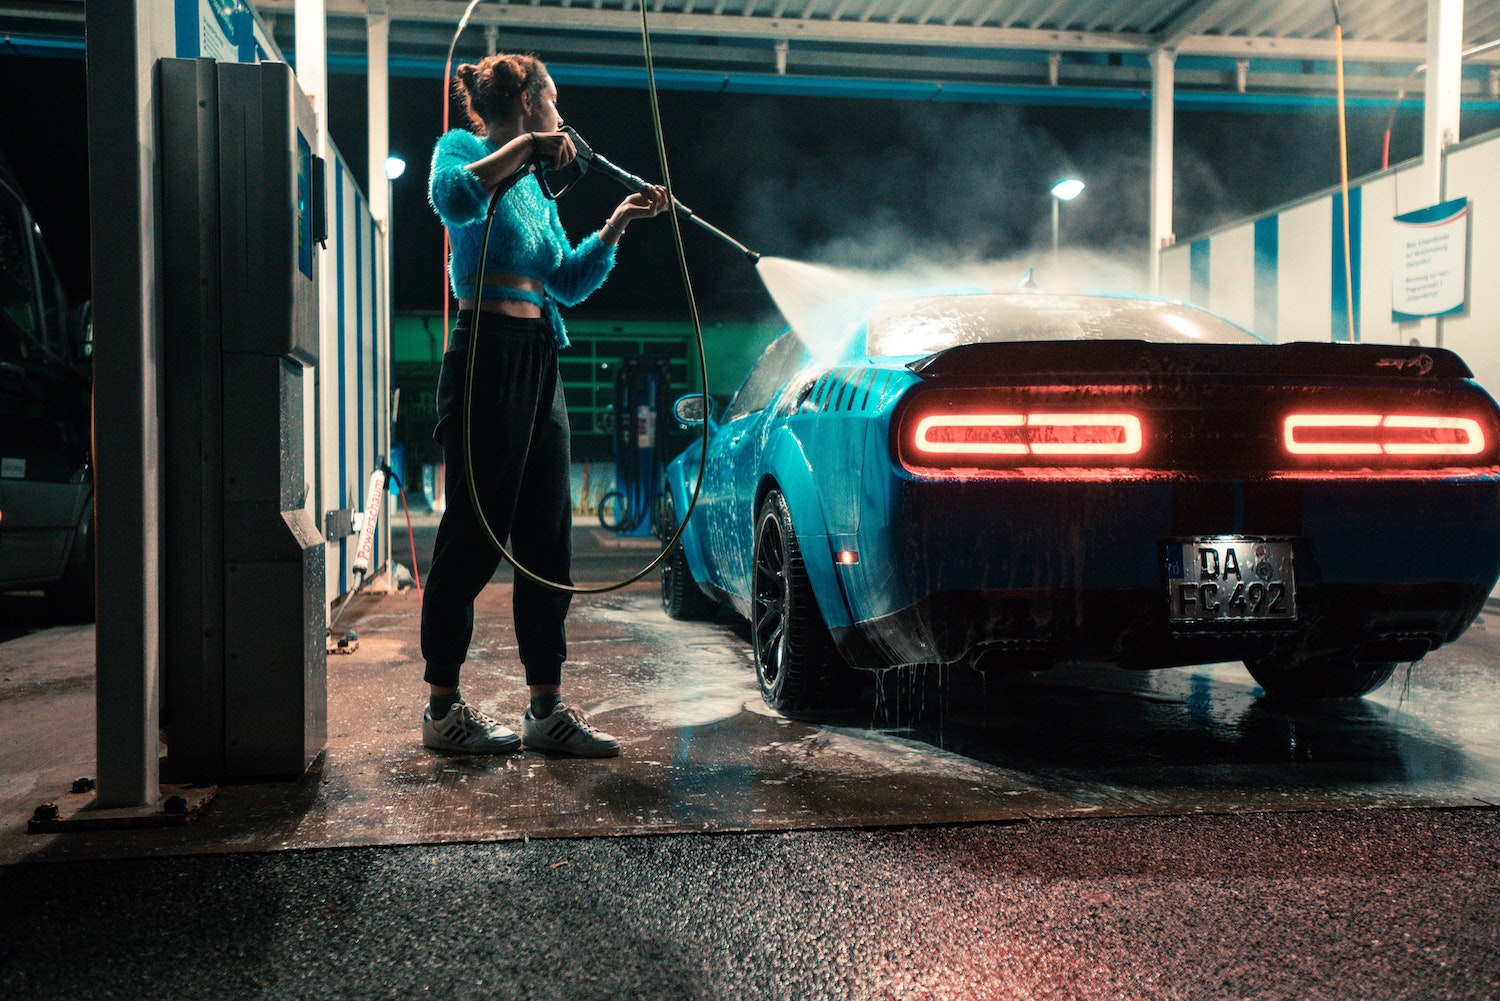 A woman uses a carwash spray gun to clean off a Dodge Challenger sports car at night.